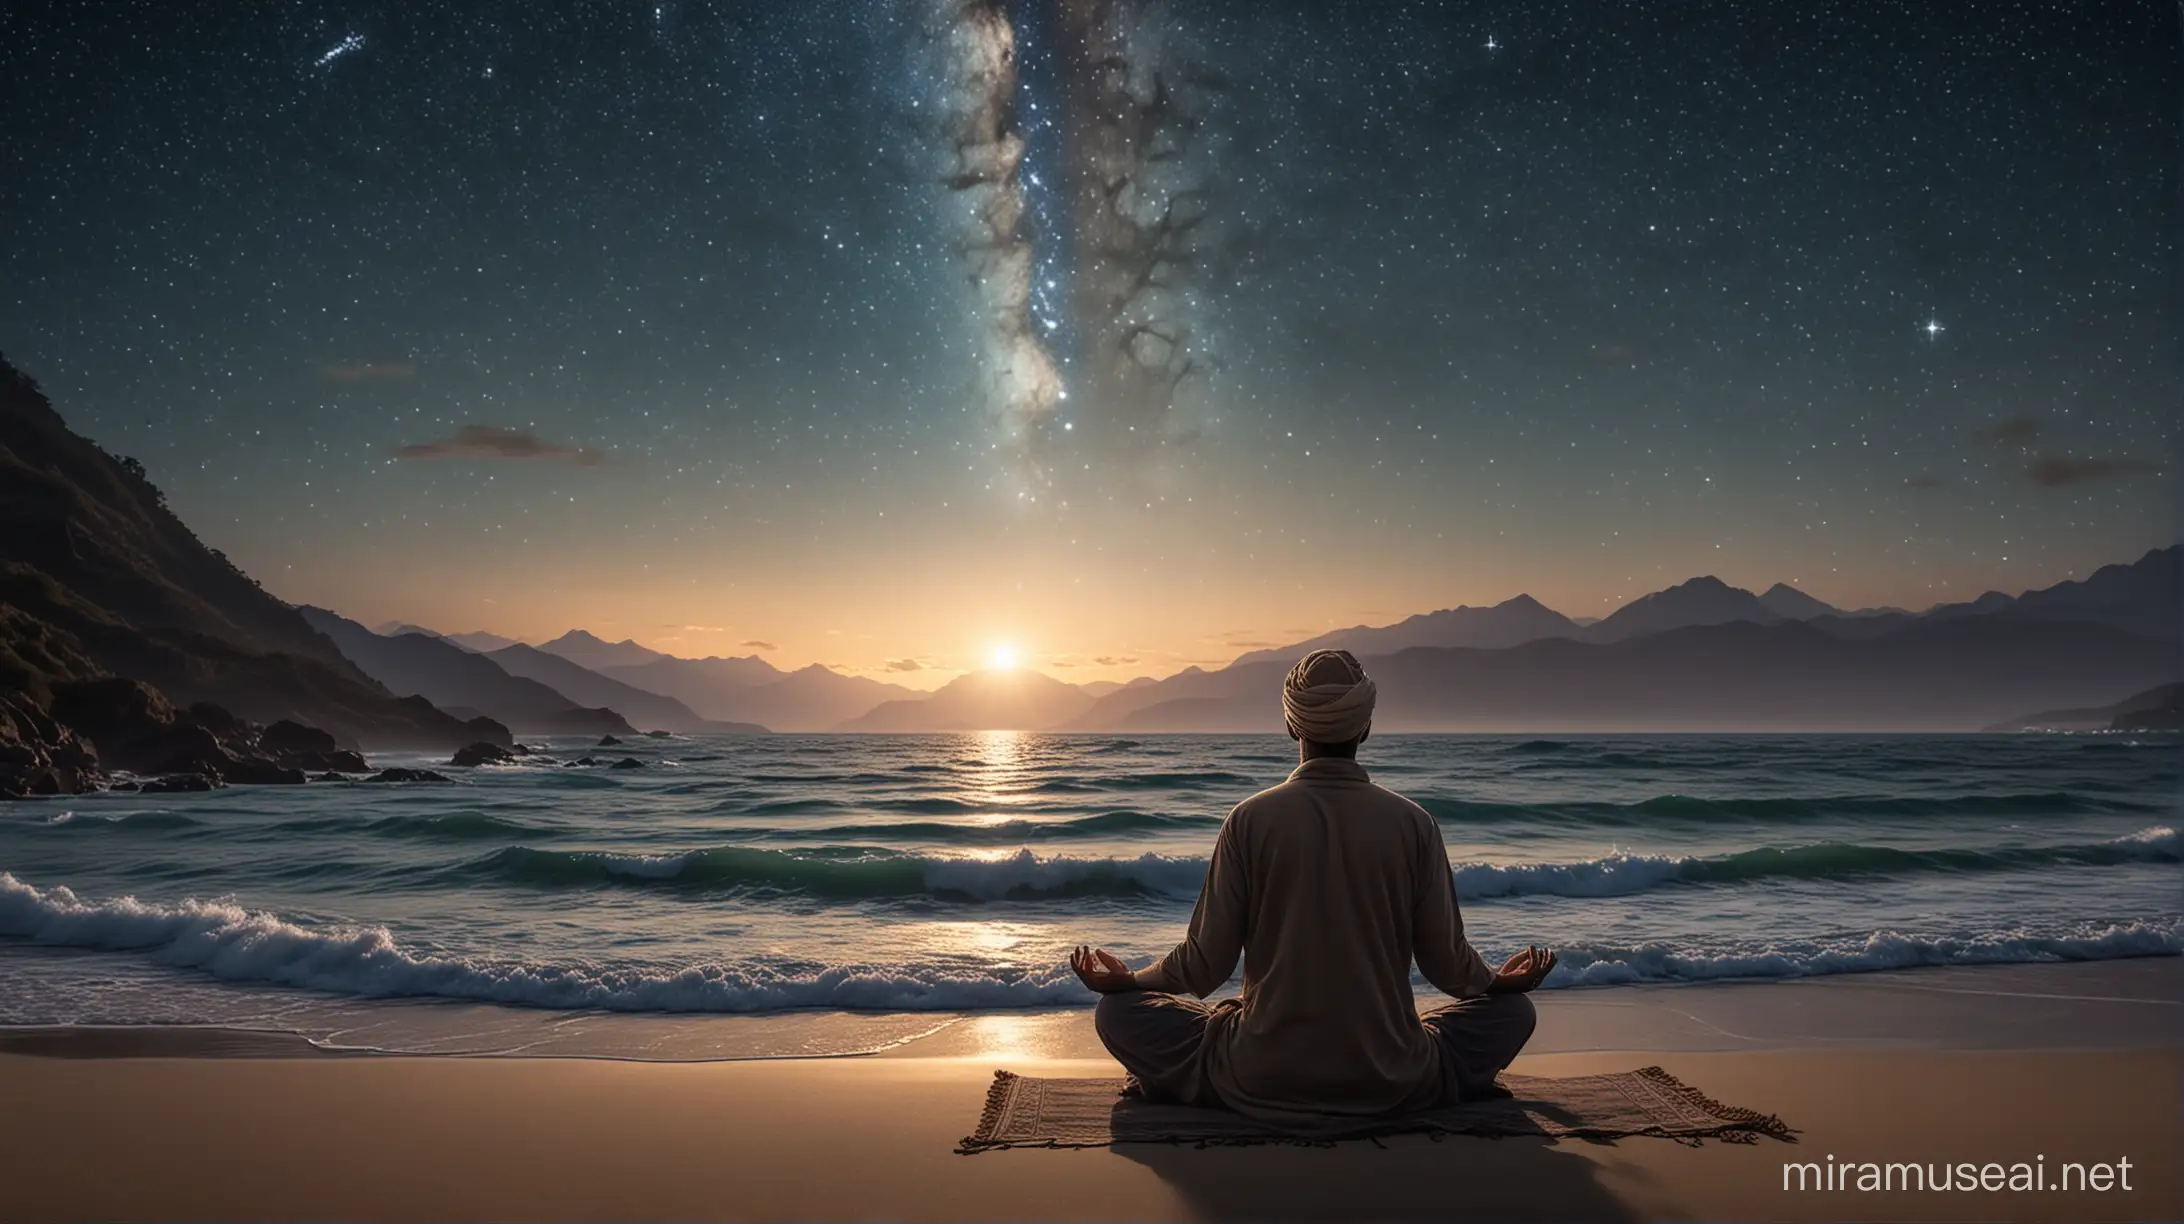 at night a muslim man wearing a back turban sitting in front of a wavy ocean meditating while you can see a beam of light from the mountains with stars in the sky